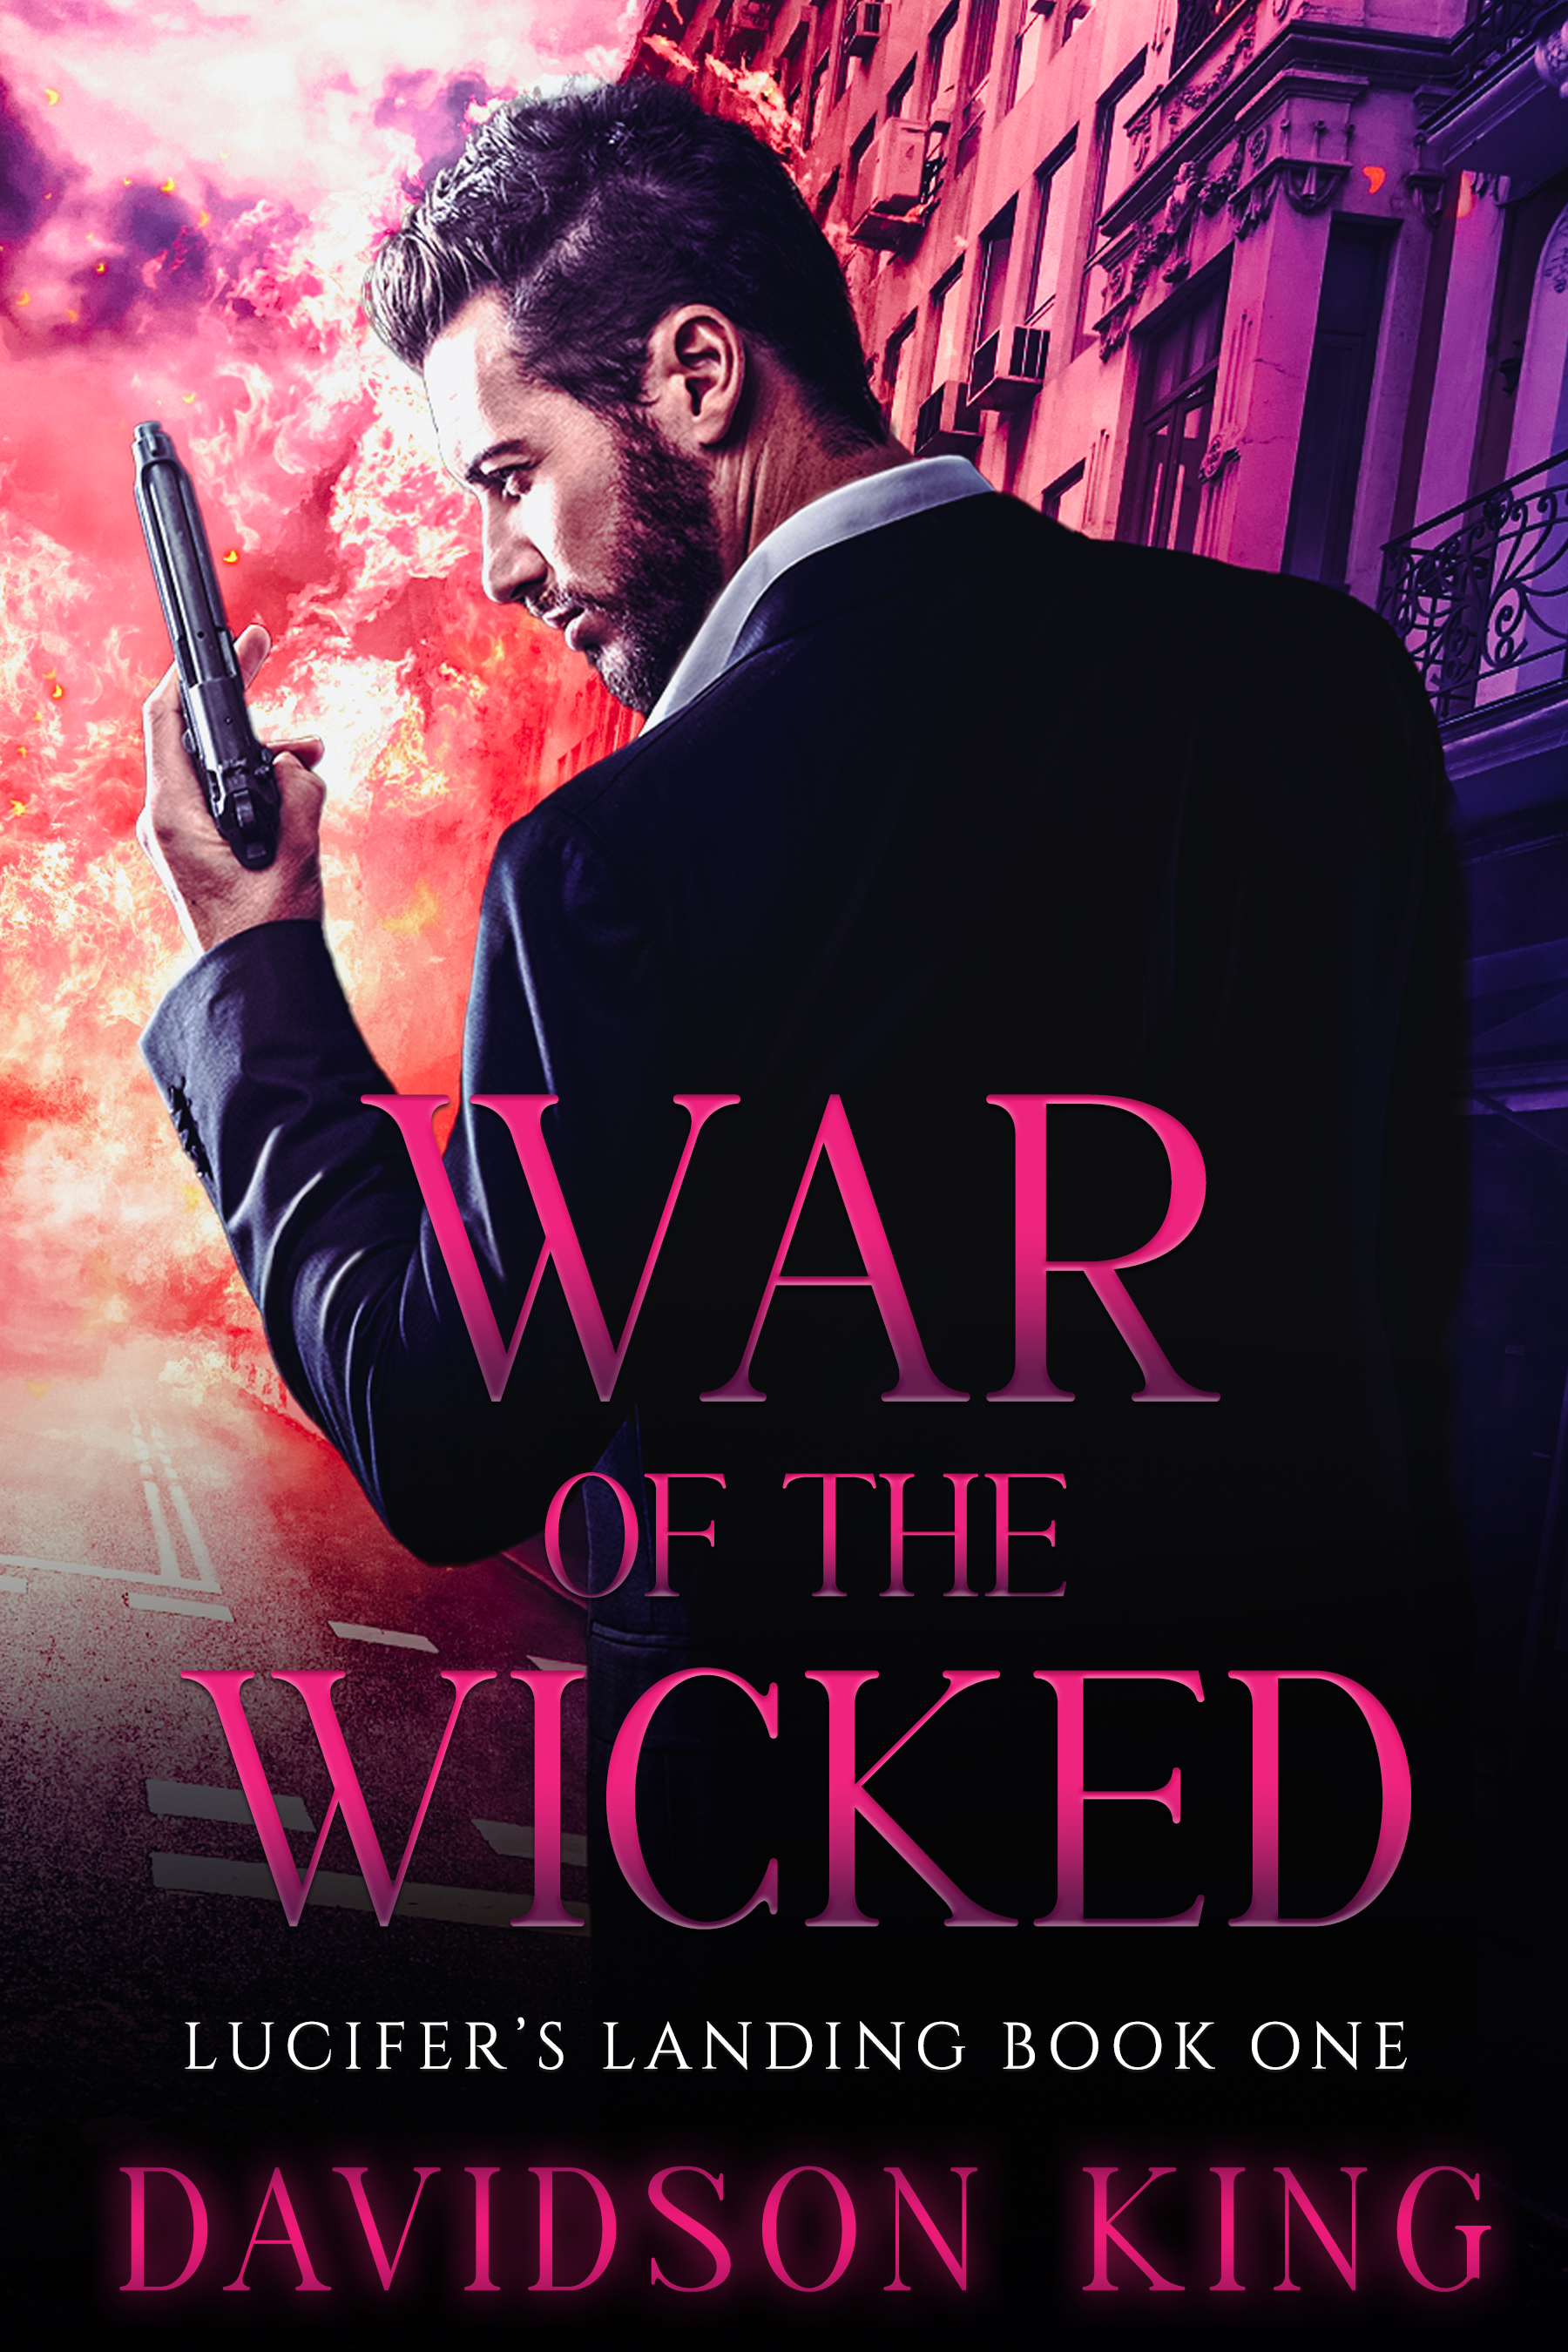 War of the Wicked: Lucifer's Landing Book One